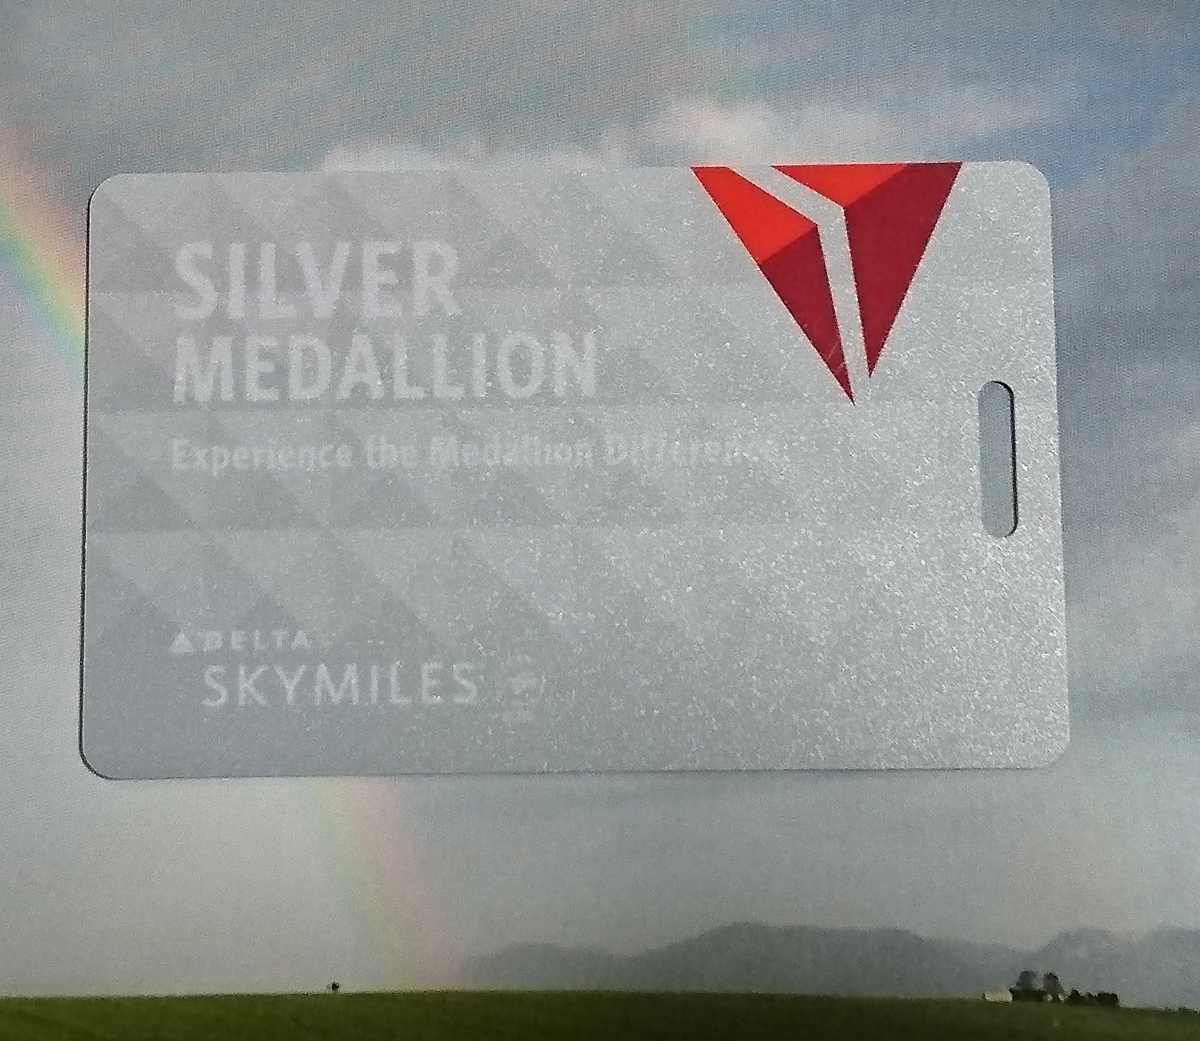  Delta Air Lines * silver medali on * bag tag 2 sheets luggage tag unused ( postage included )